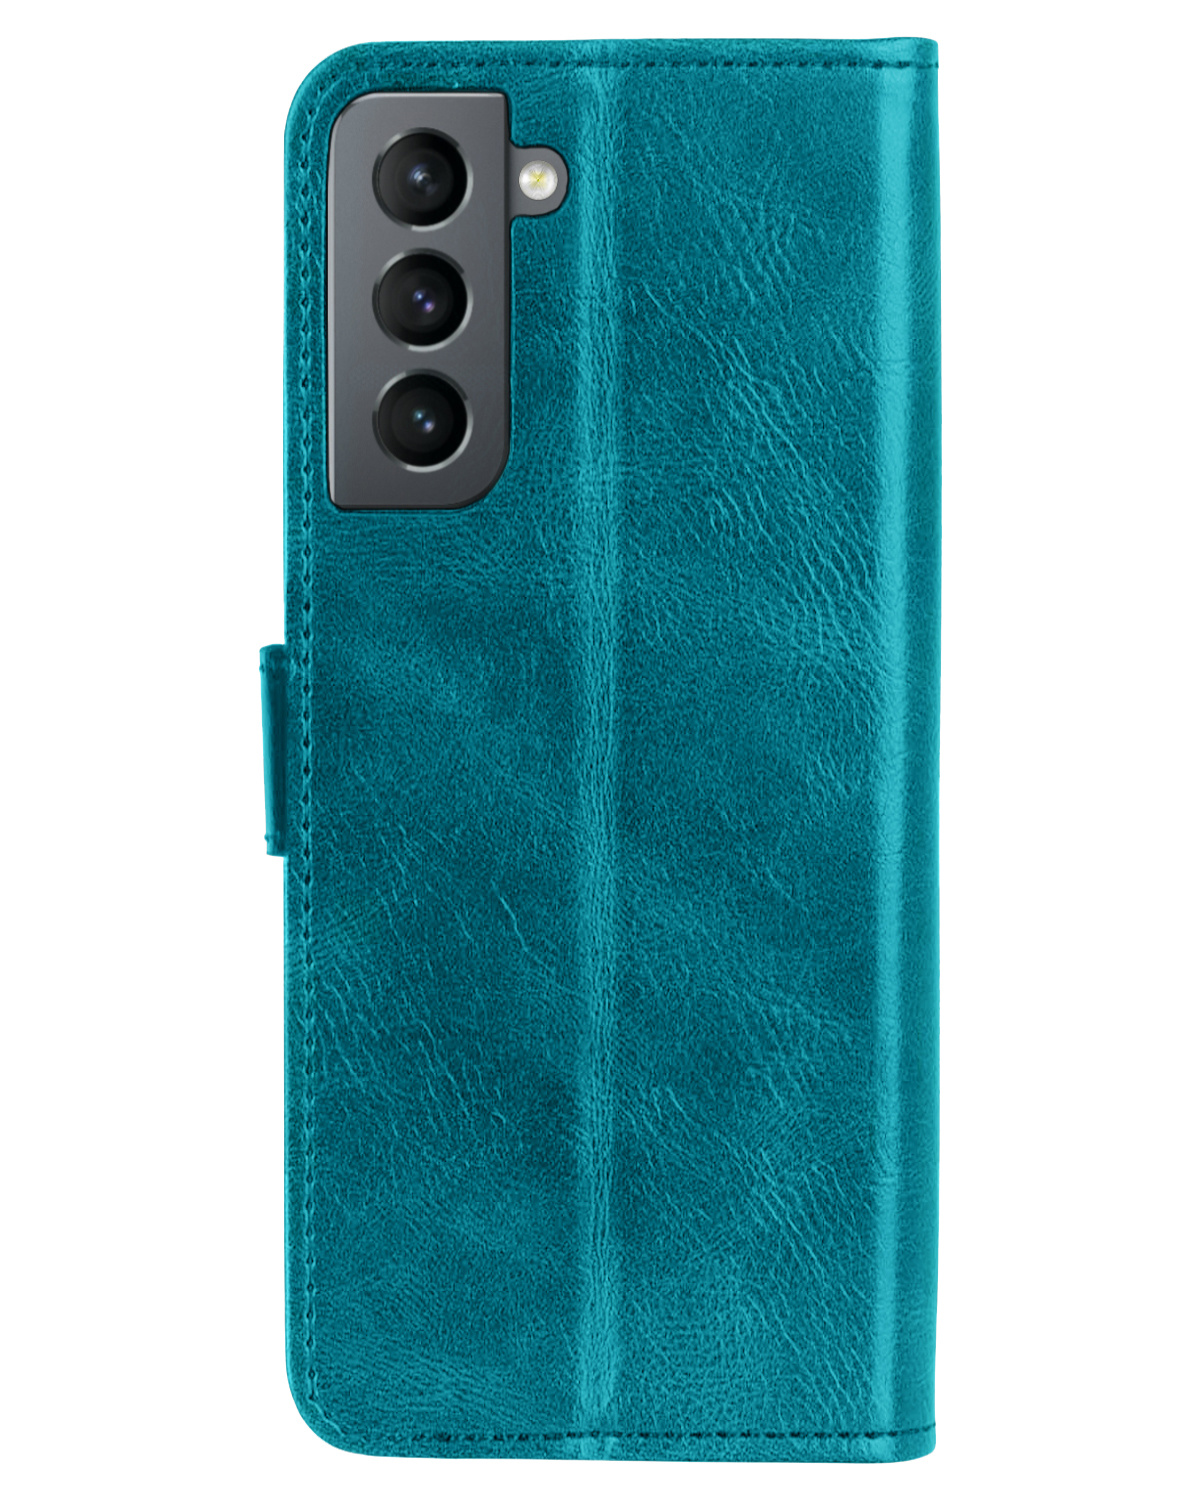 Nomfy Samsung Galaxy S21 FE Hoes Bookcase Turquoise - Samsung Galaxy S21 FE Book Cover Flipcase - Samsung Galaxy S21 FE Hoesje - Turquoise